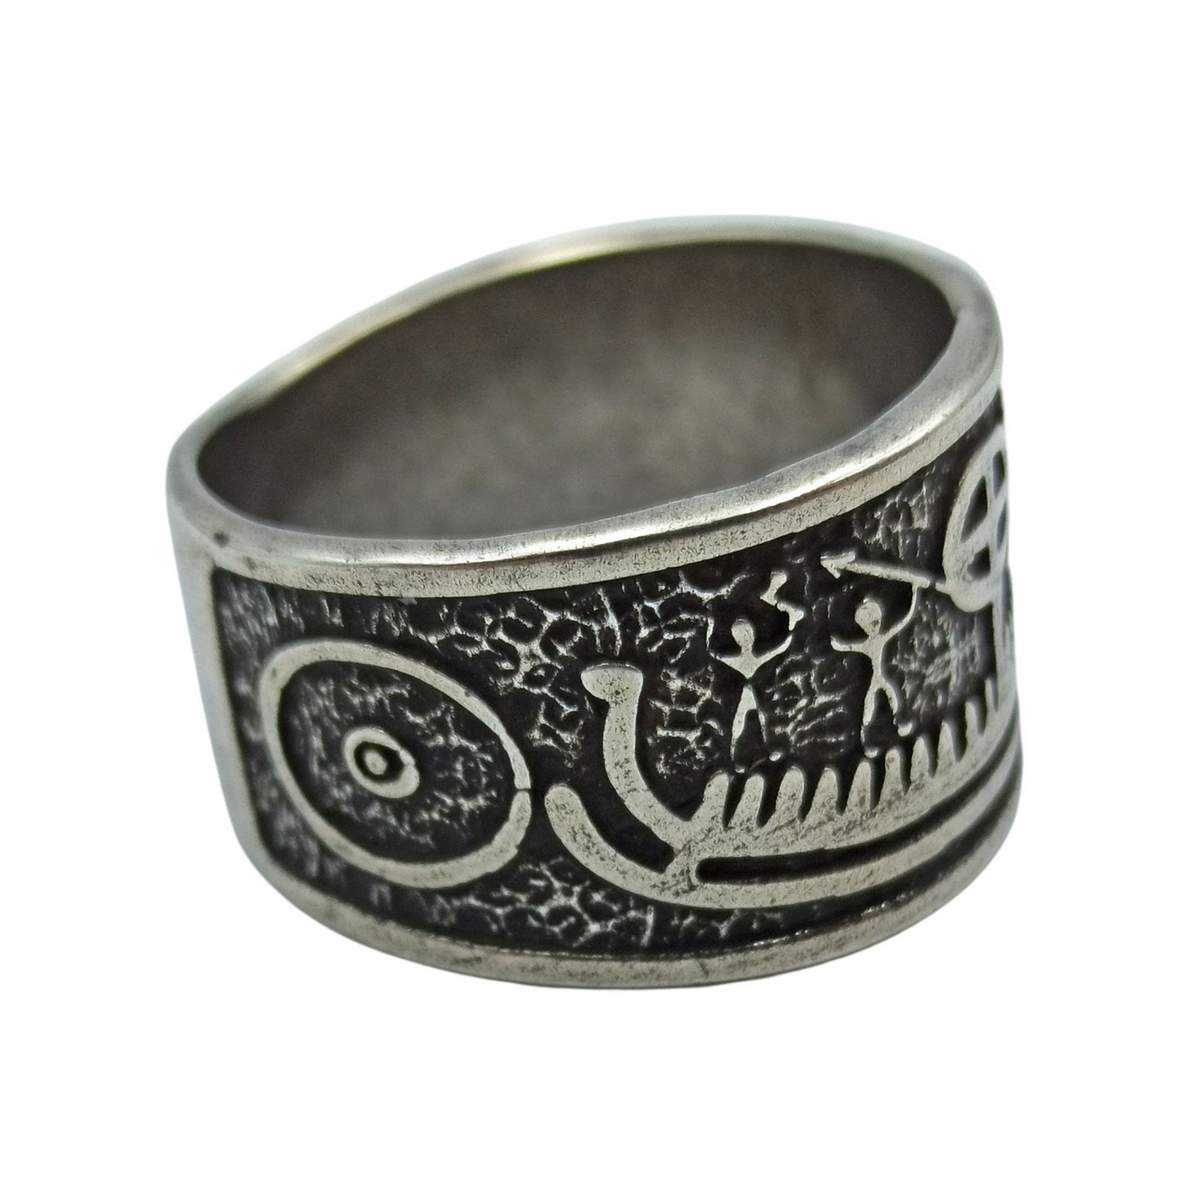 Norse Petroglyph ring from bronze